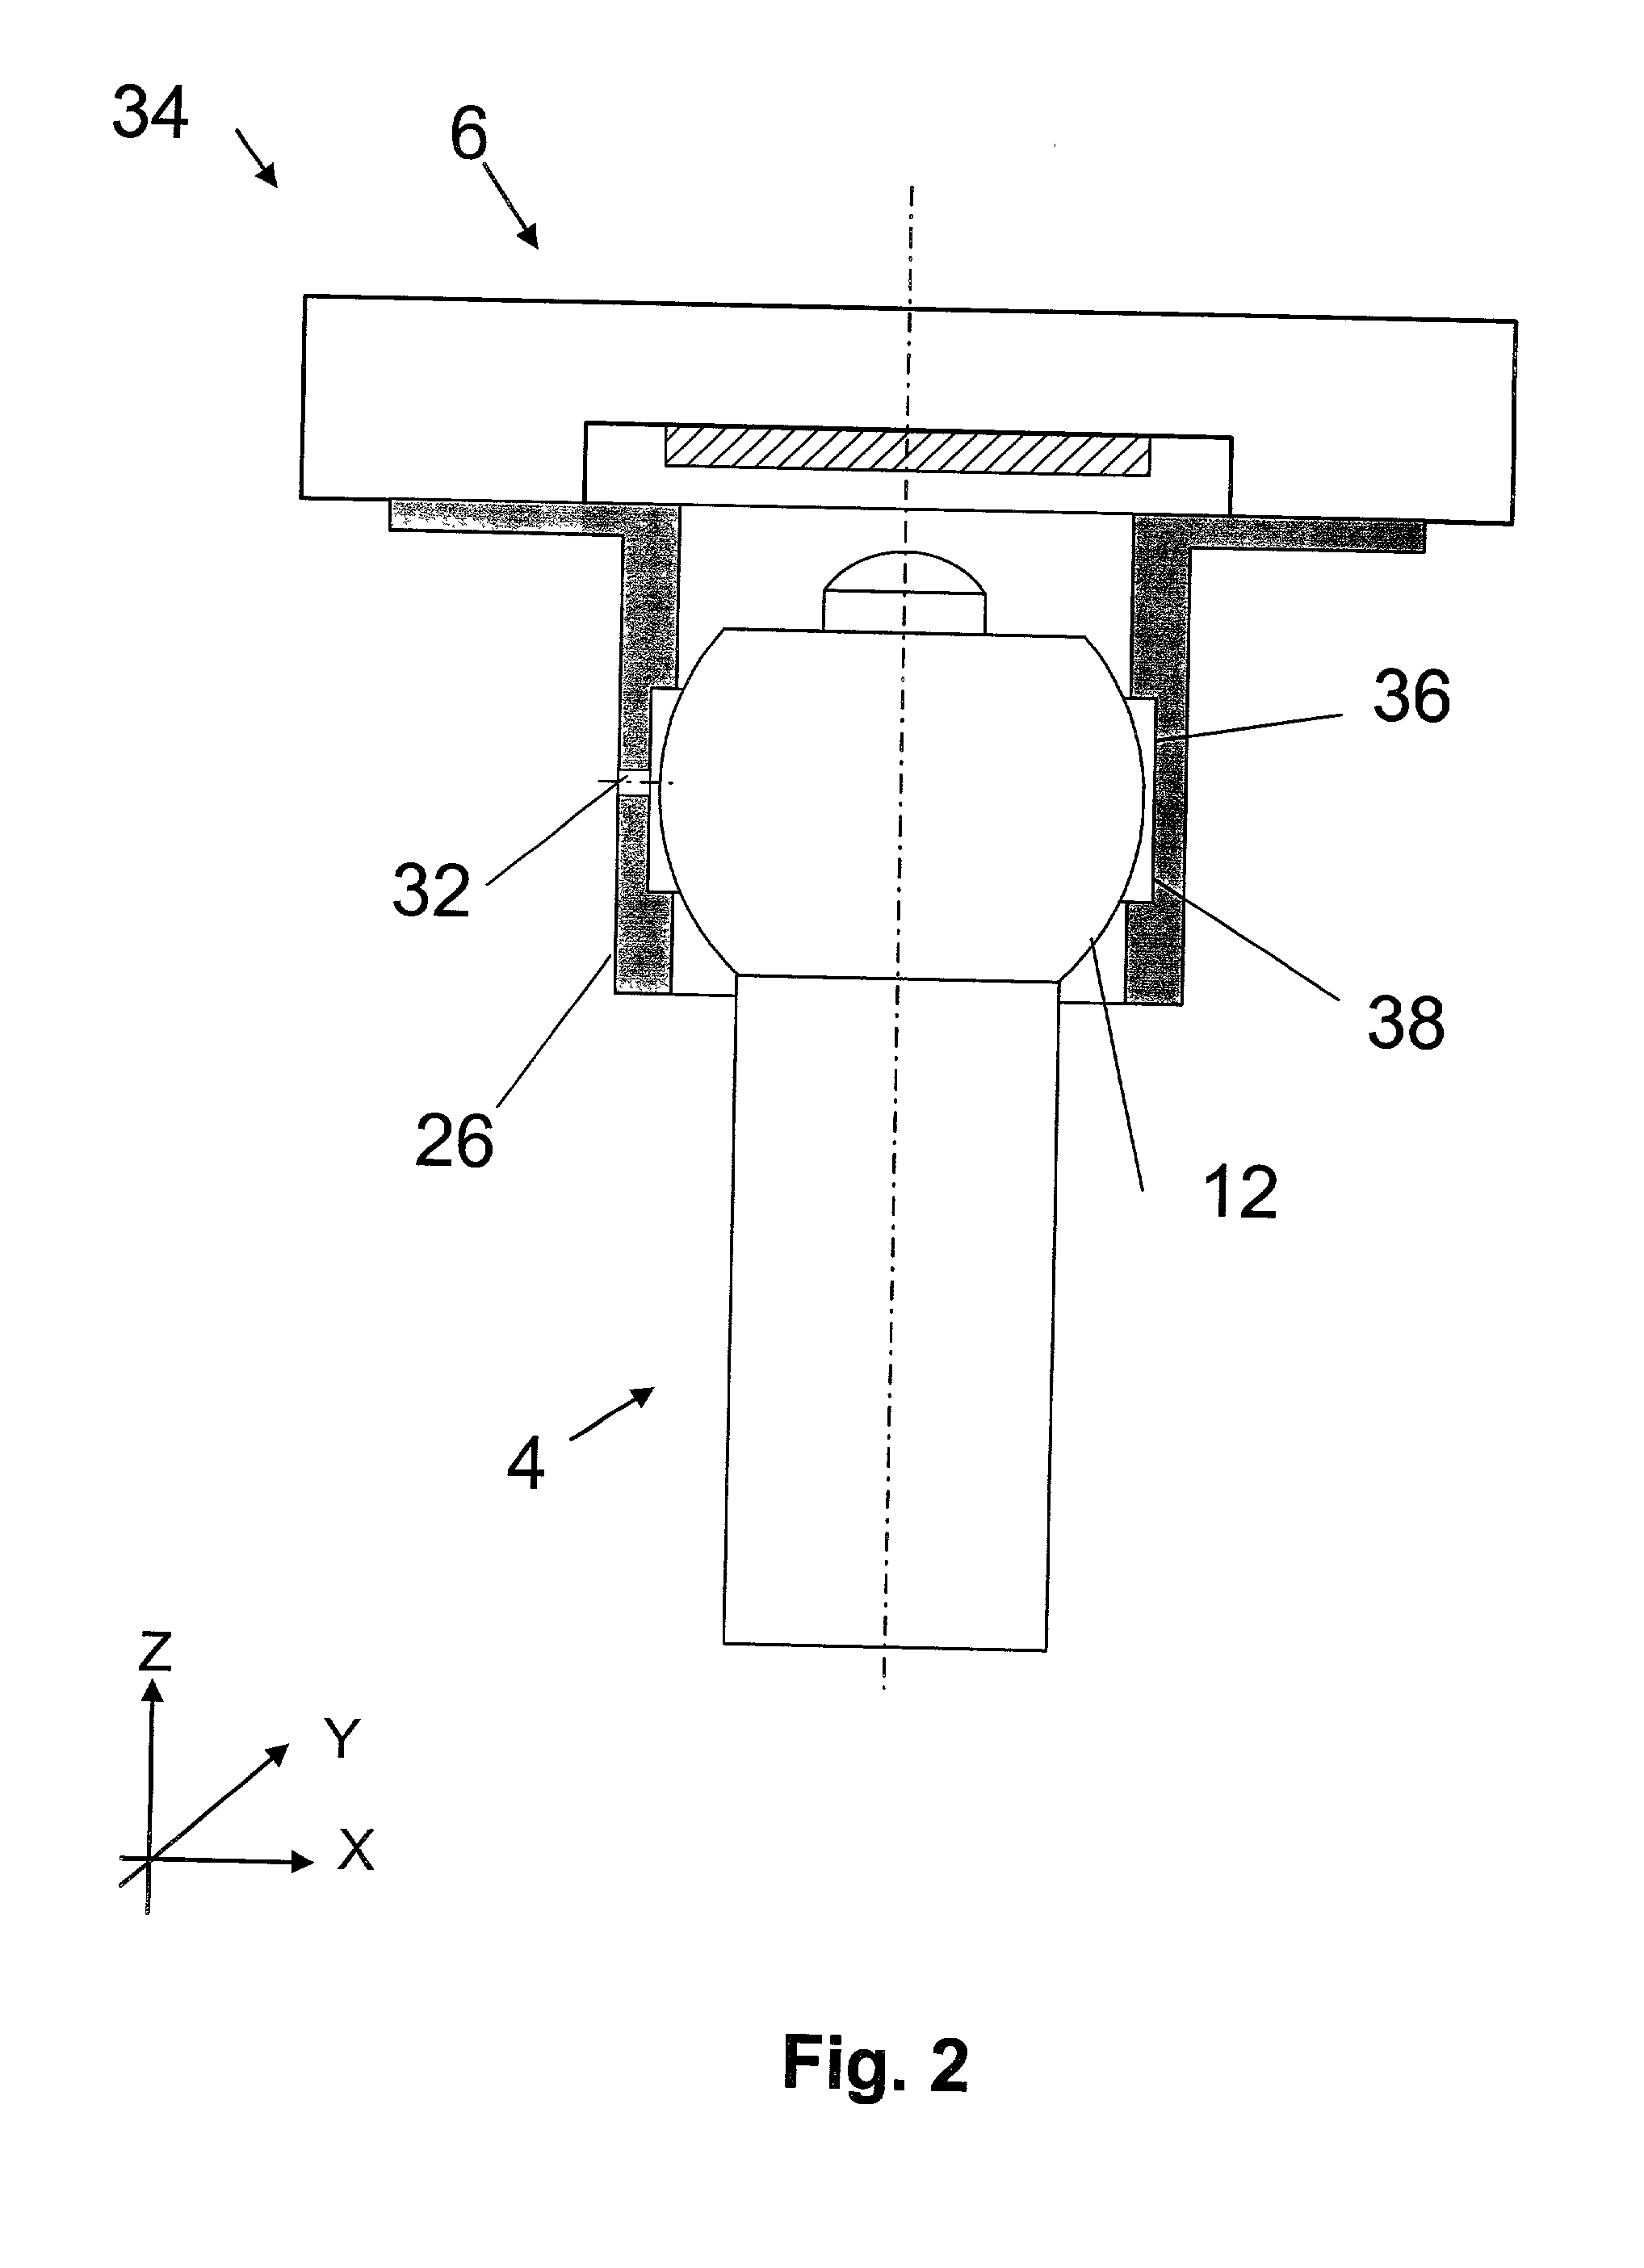 Feature and method to align and assemble photonic components